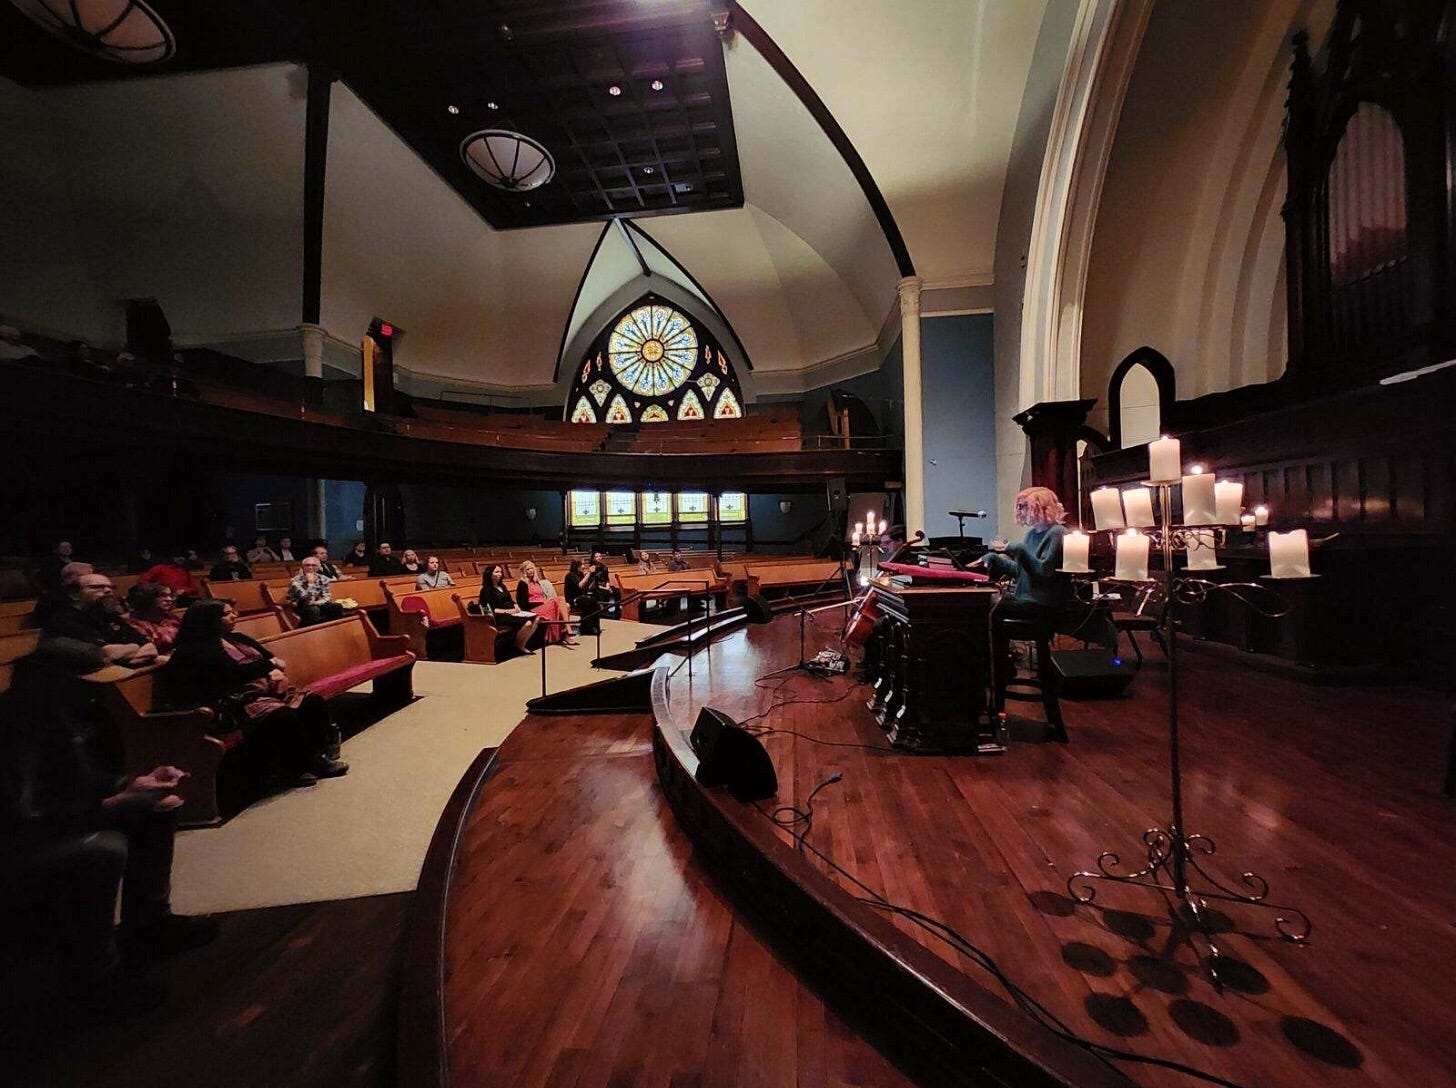 Elle sitting behind pulpit (side view) with audience in church pews and stained glass window 